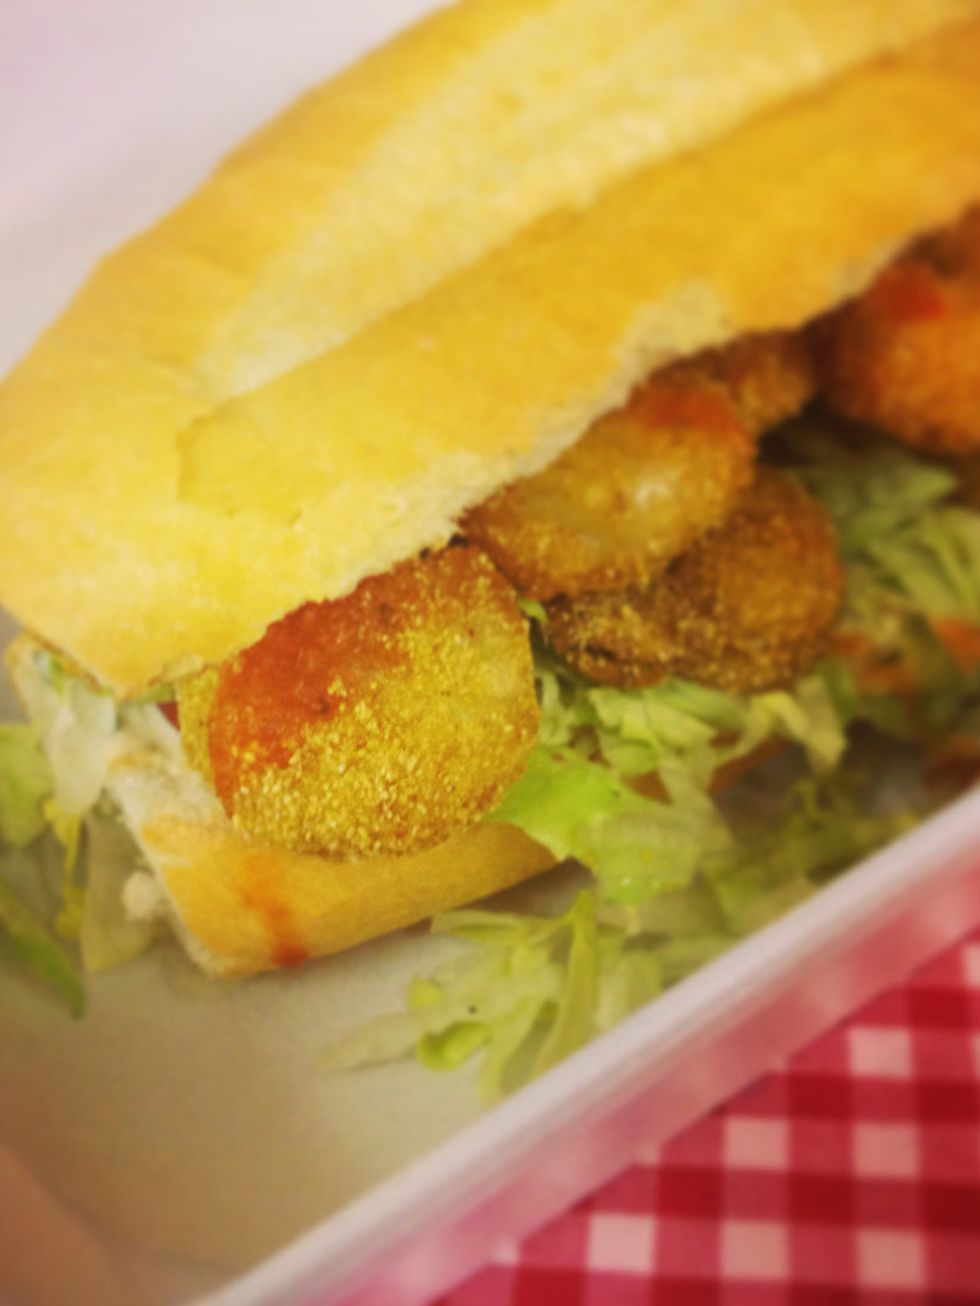 &lt;p&gt;&lt;strong&gt;FOOD: Po&rsquo; Boy Night at the Dolls House&lt;/strong&gt;&lt;/p&gt;&lt;p&gt;If you&rsquo;ve never heard of a po&rsquo; boy, it&rsquo;s about to be engrained in your memory forever.&lt;/p&gt;&lt;p&gt;A traditional sandwich from Lou